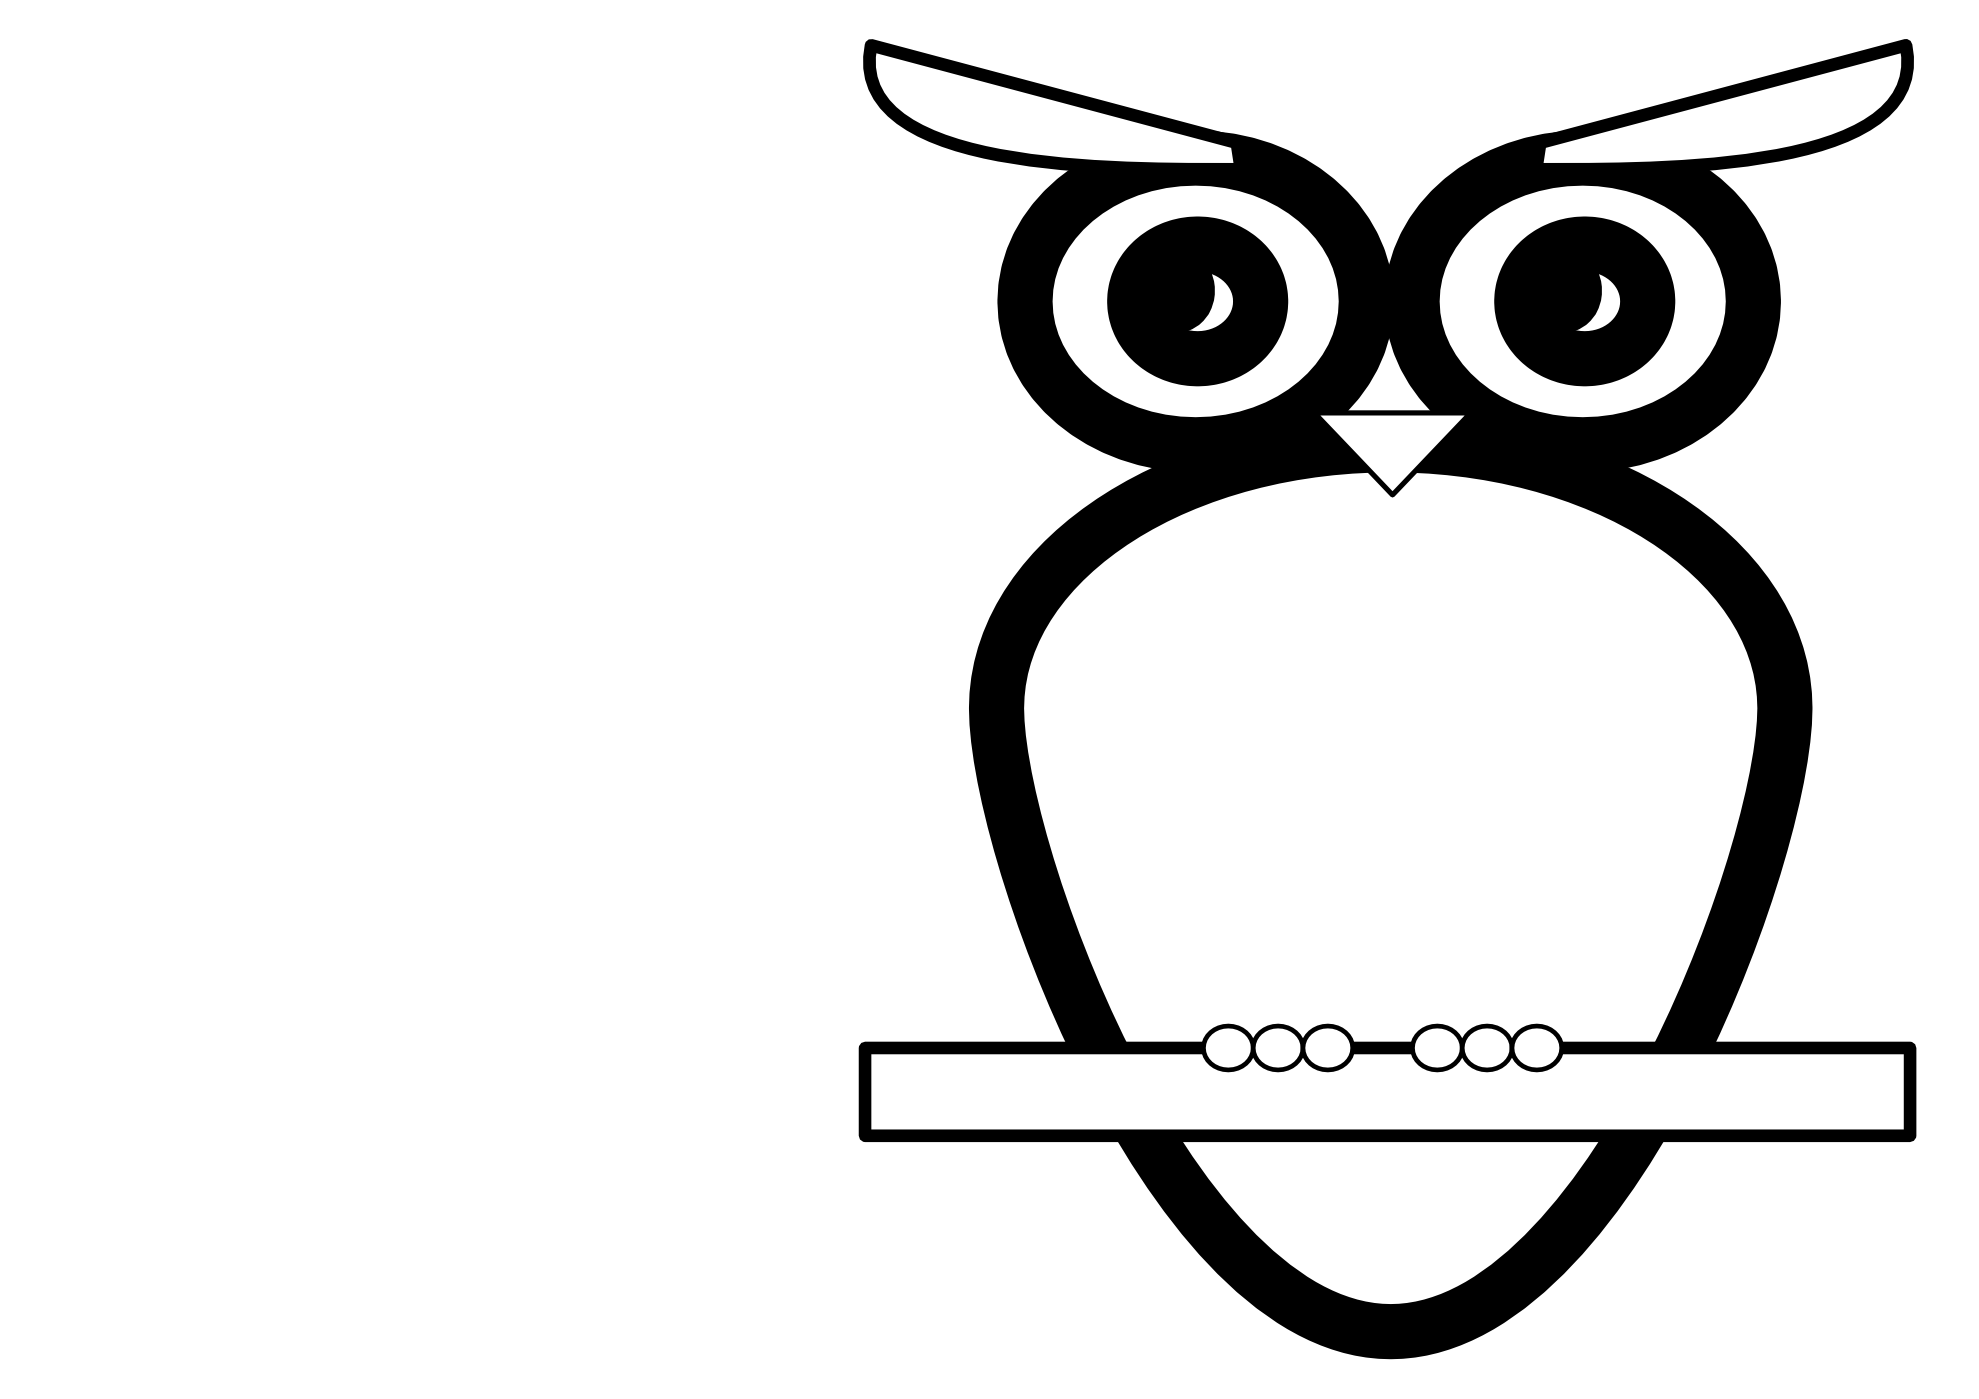 owl images clipart black and white - photo #47